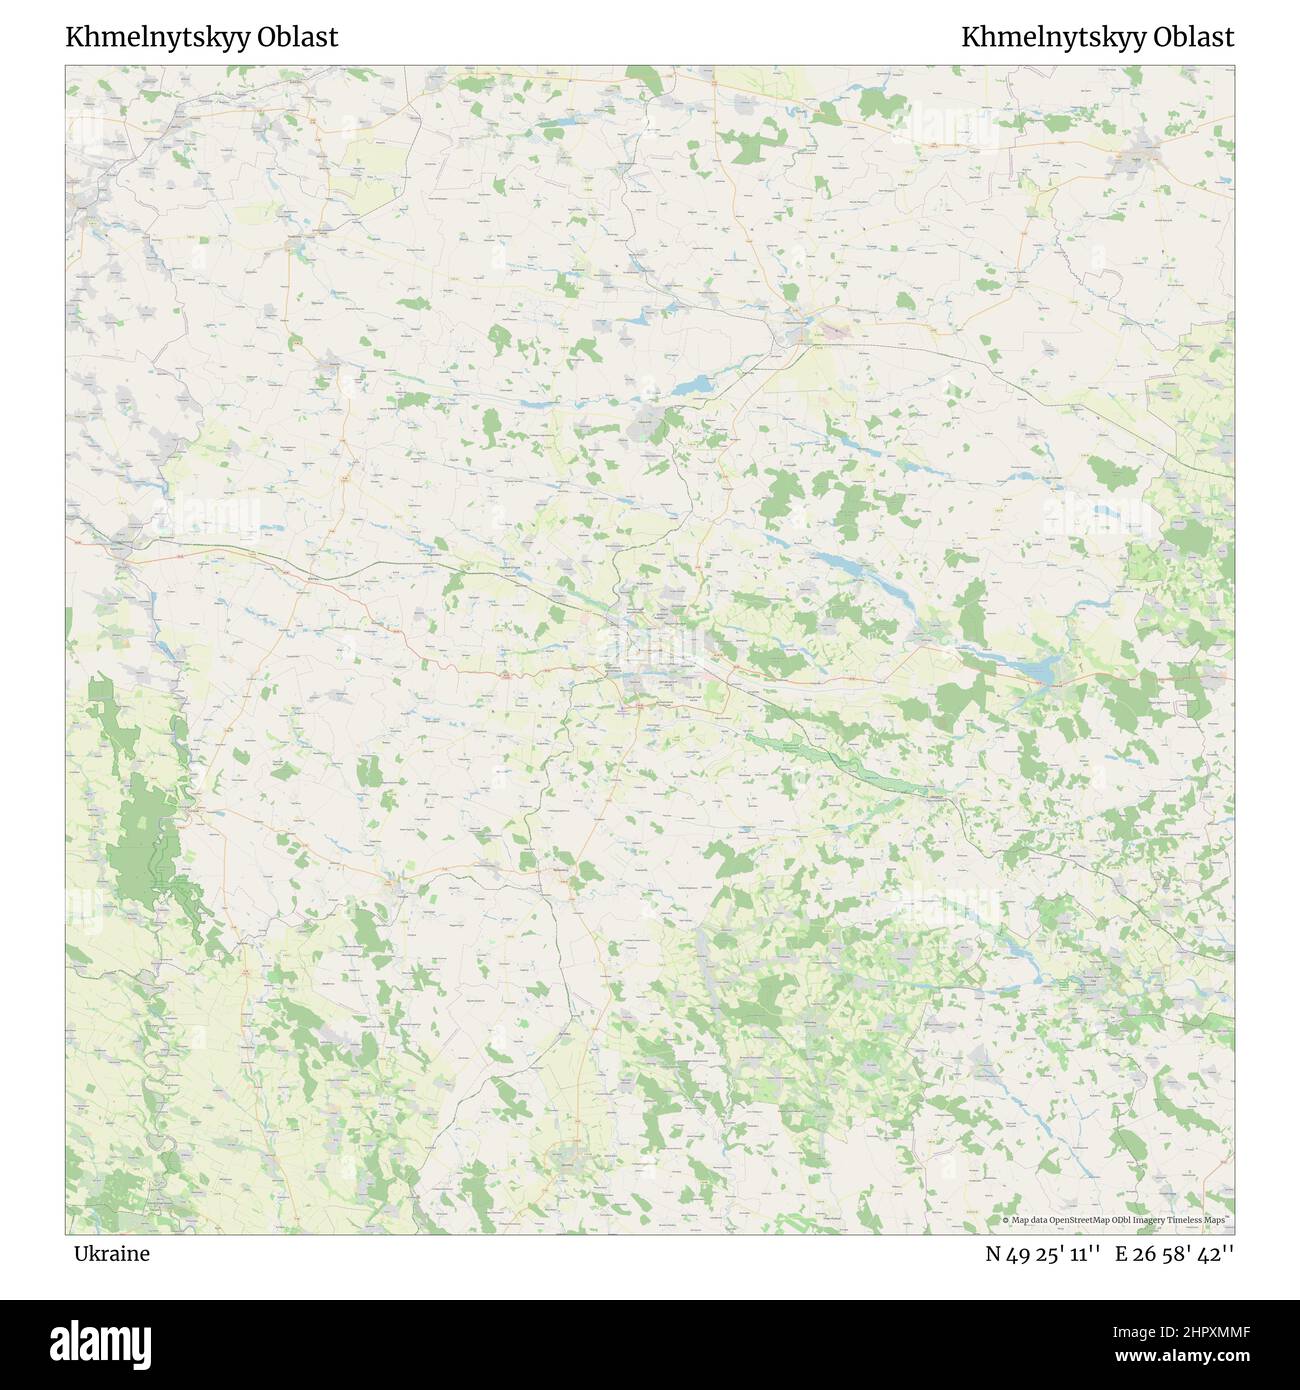 Khmelnytskyy Oblast, Ukraine, Khmelnytskyy Oblast, N 49 25' 11'', E 26 58' 42'', map, Timeless Map published in 2021. Travelers, explorers and adventurers like Florence Nightingale, David Livingstone, Ernest Shackleton, Lewis and Clark and Sherlock Holmes relied on maps to plan travels to the world's most remote corners, Timeless Maps is mapping most locations on the globe, showing the achievement of great dreams Stock Photo